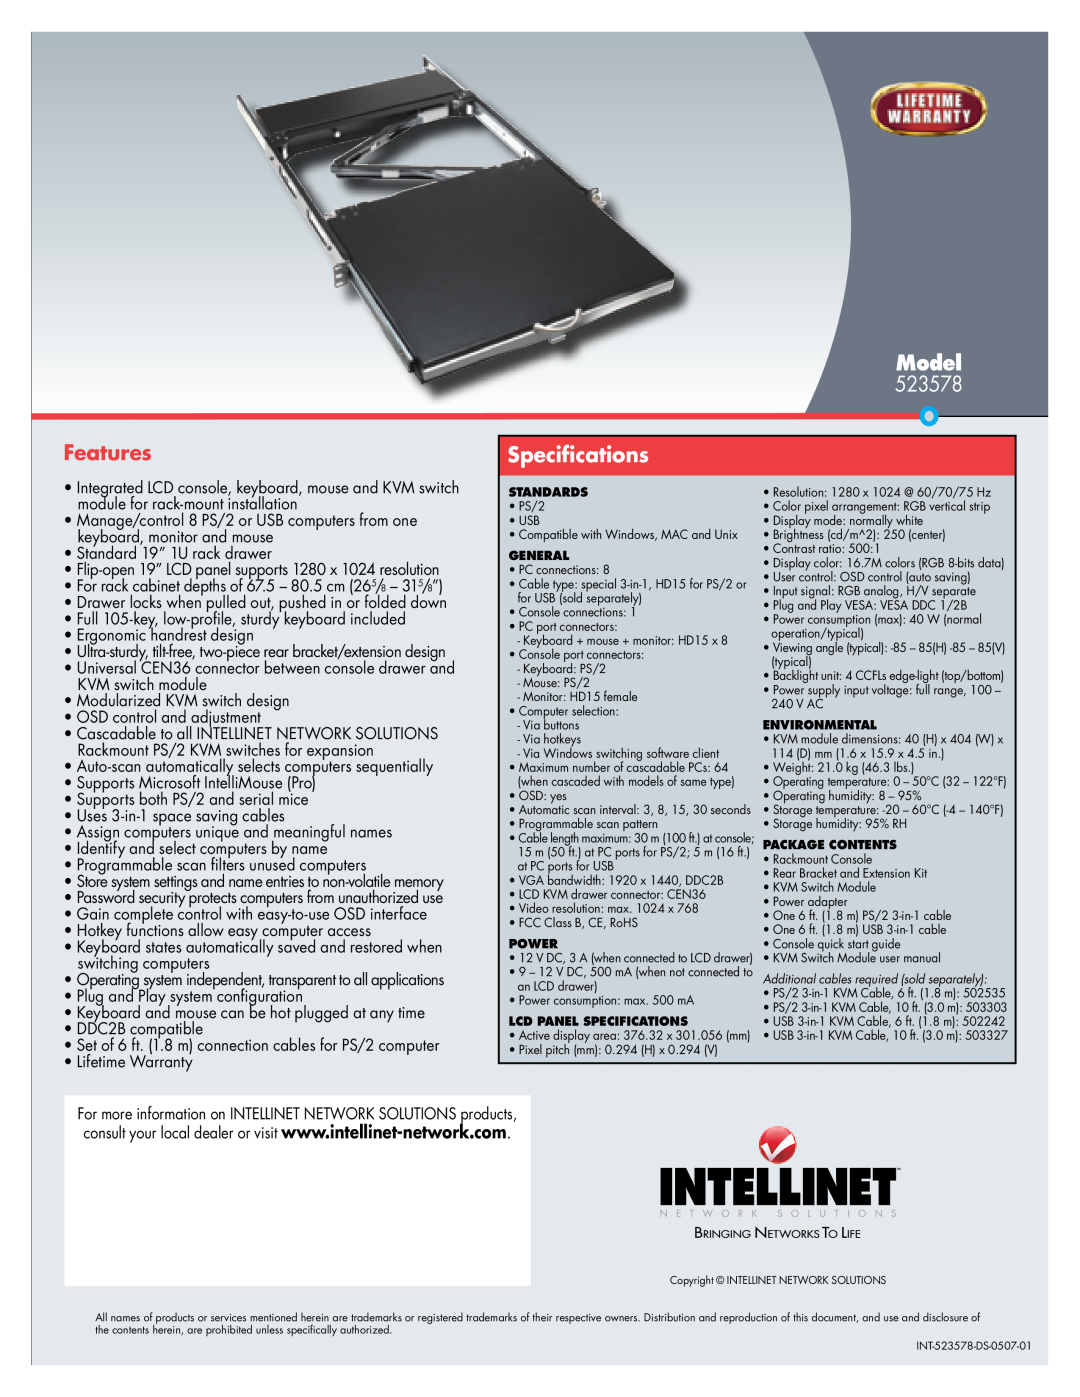 Intellinet Network Solutions 523578 warranty Features, Model Specifications 